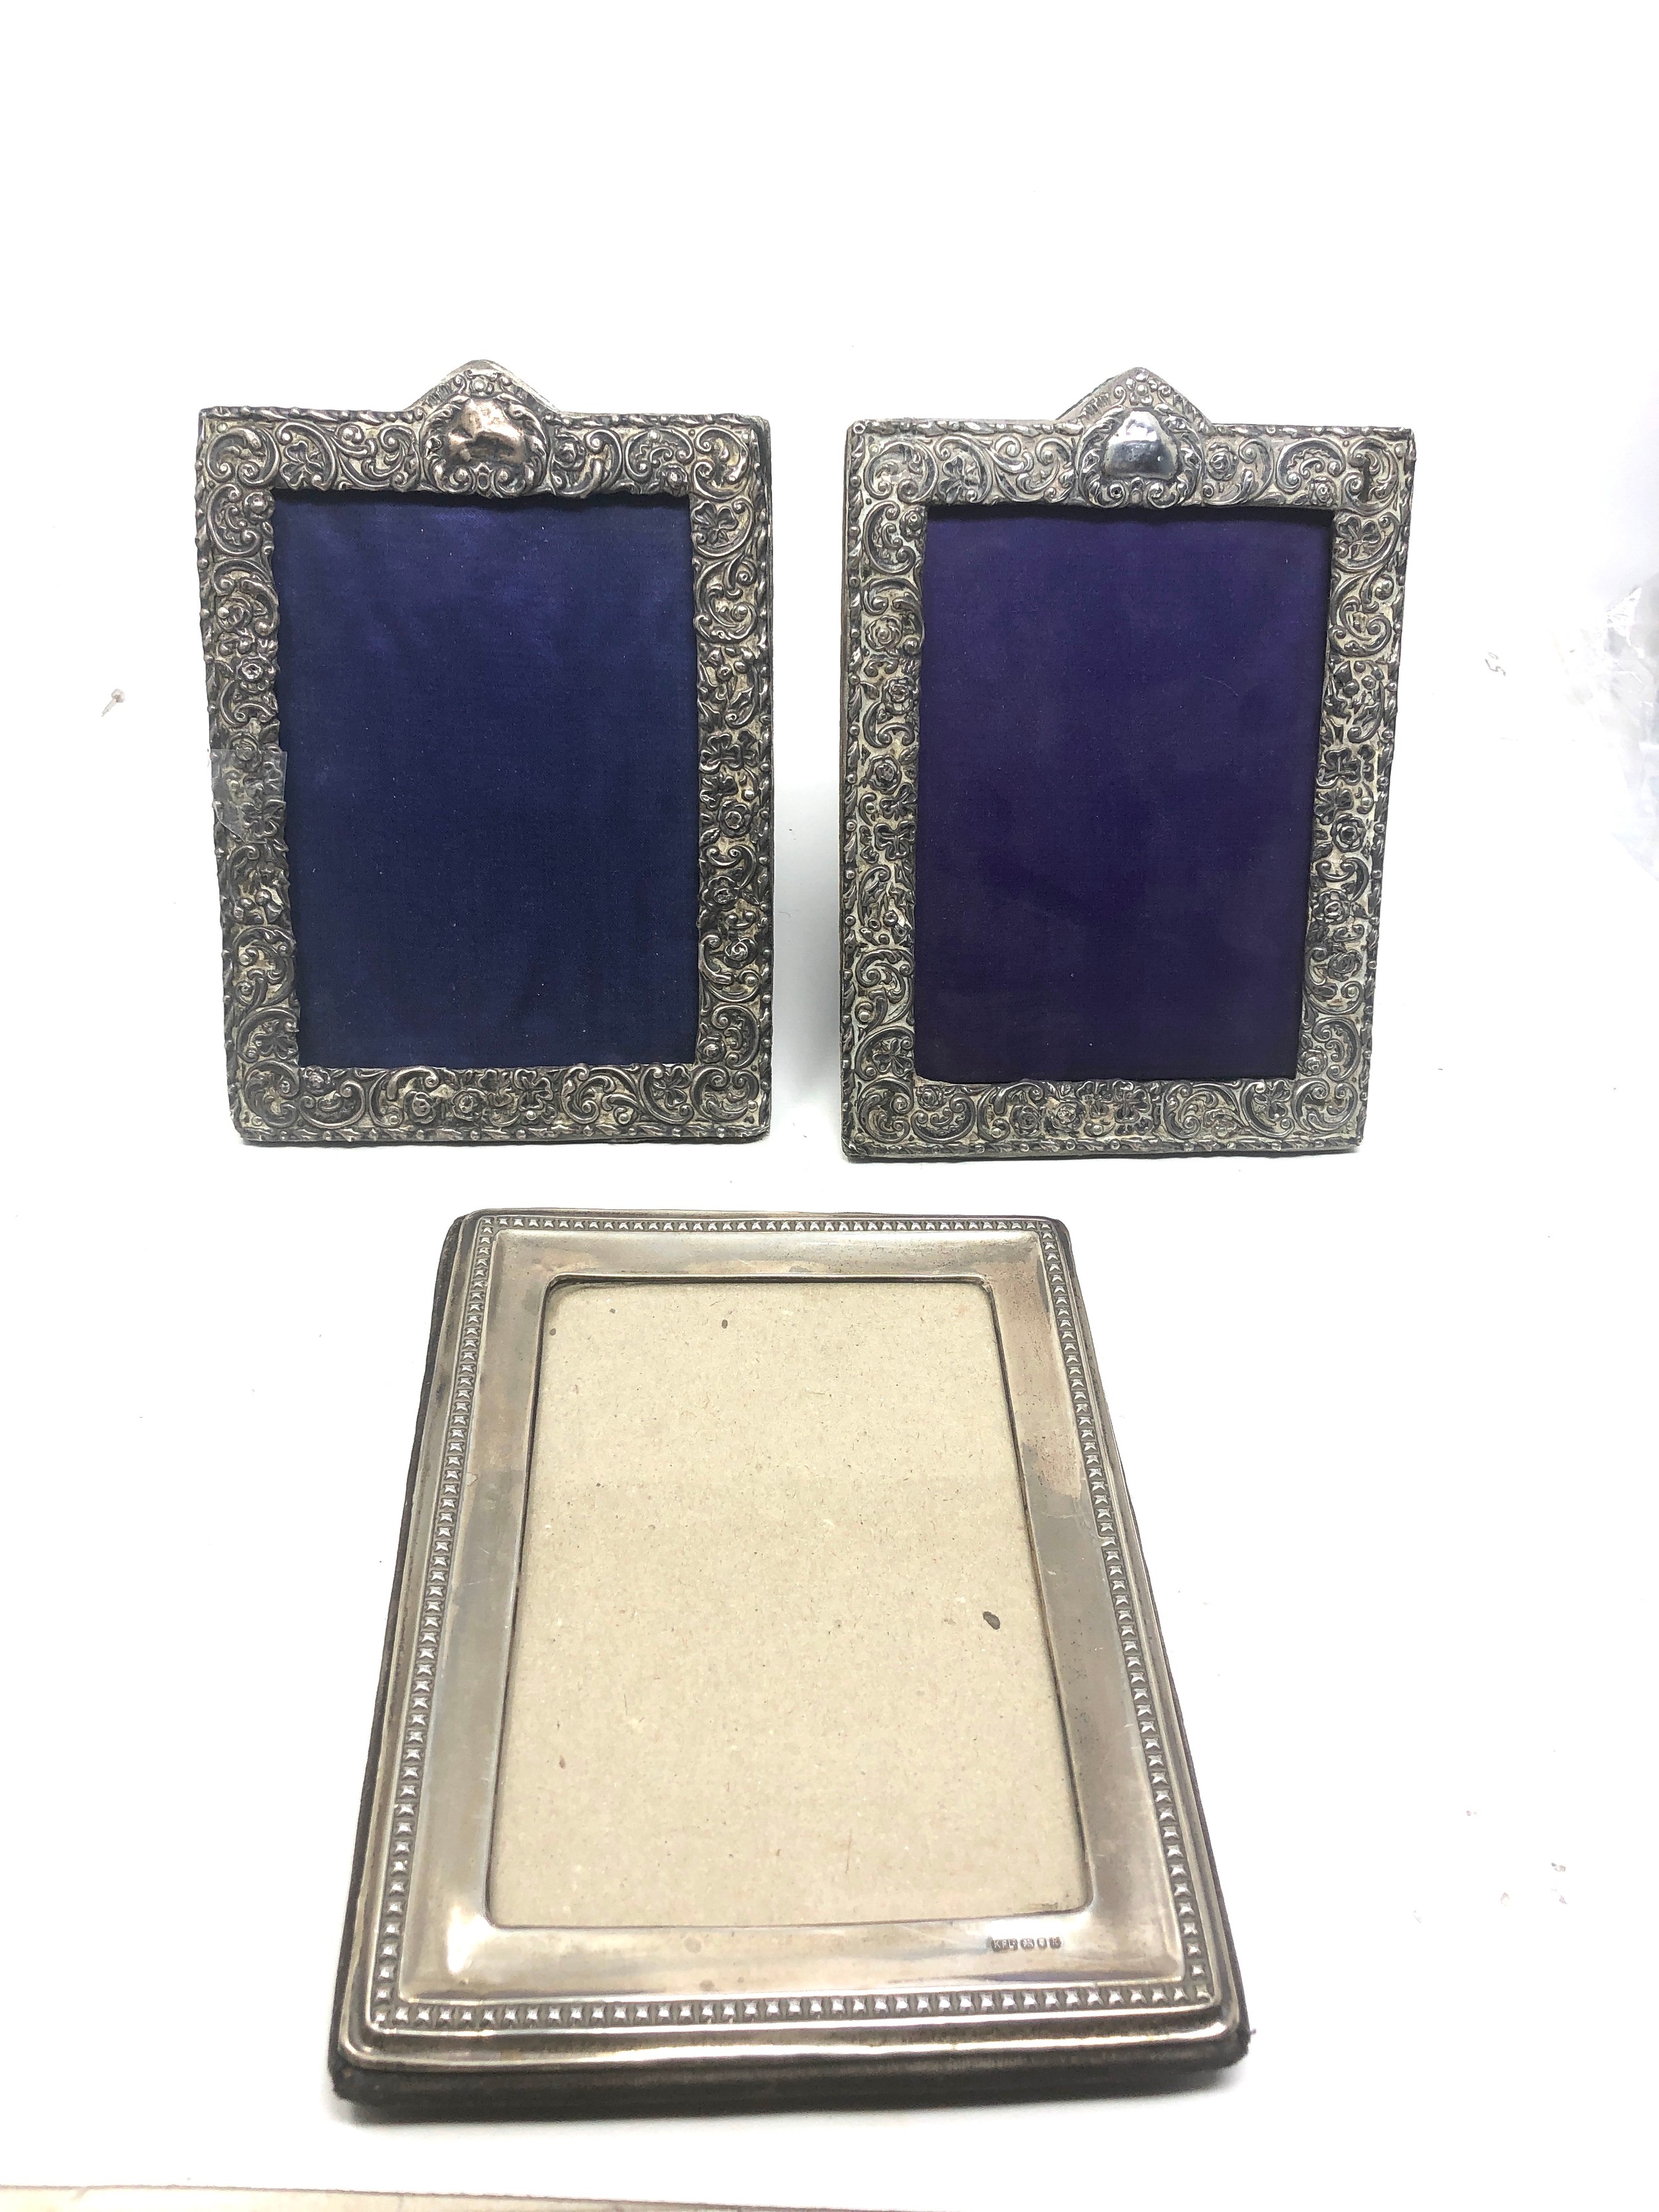 3 silver picture frames missing glass